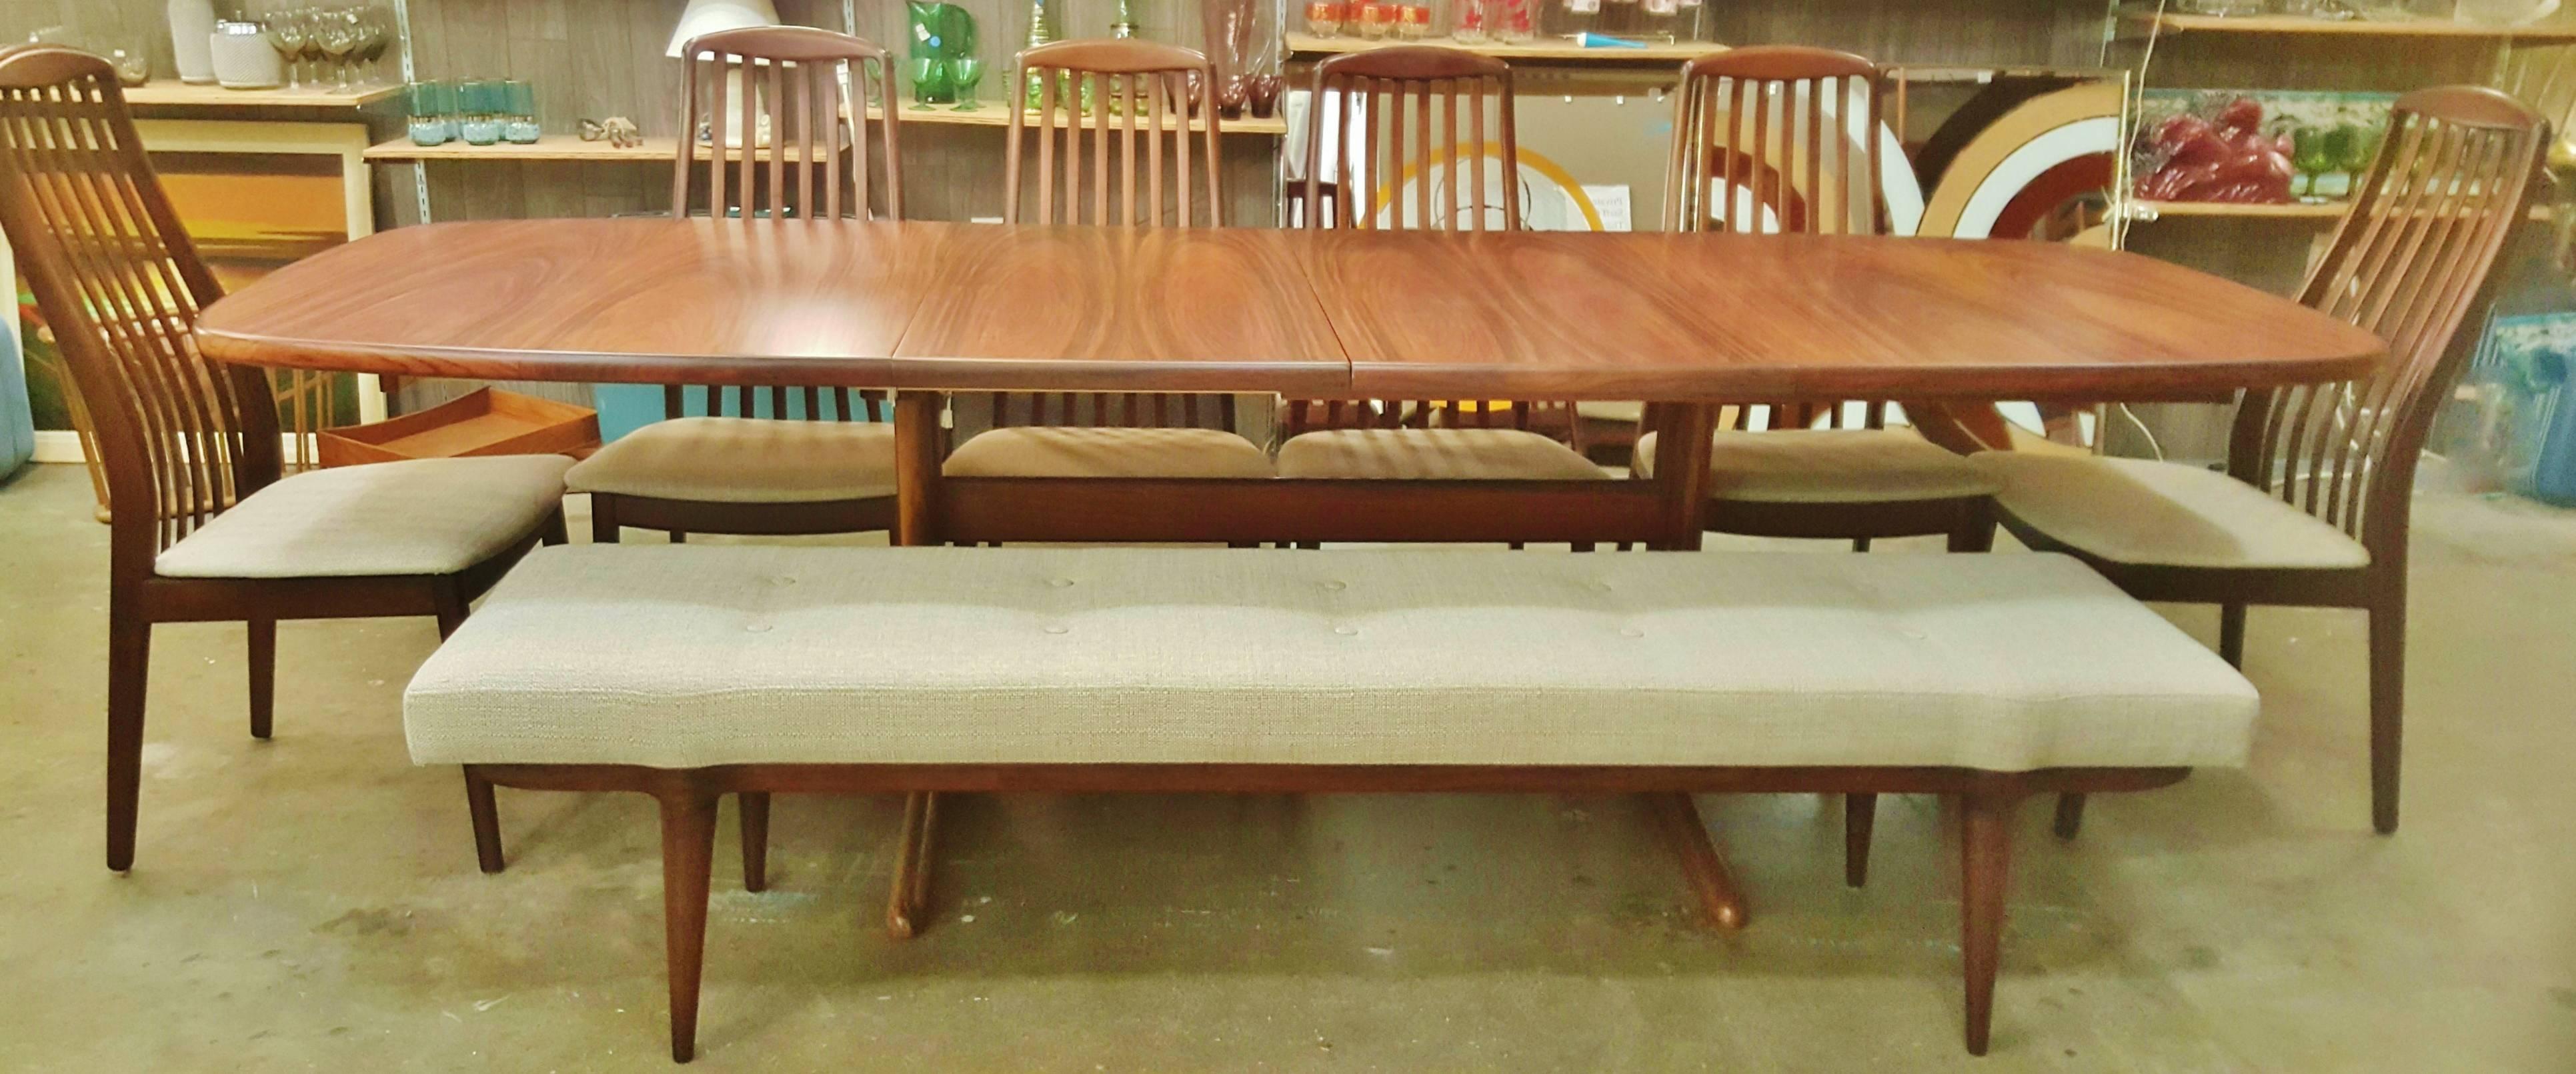 This totally hot Danish Modern rosewood bench is super rare and super styling! Featuring tapering conical legs that curve around the front of the legs (as does the seat) with a gorgeous rich tone that compliments the tweed upholstery perfectly.